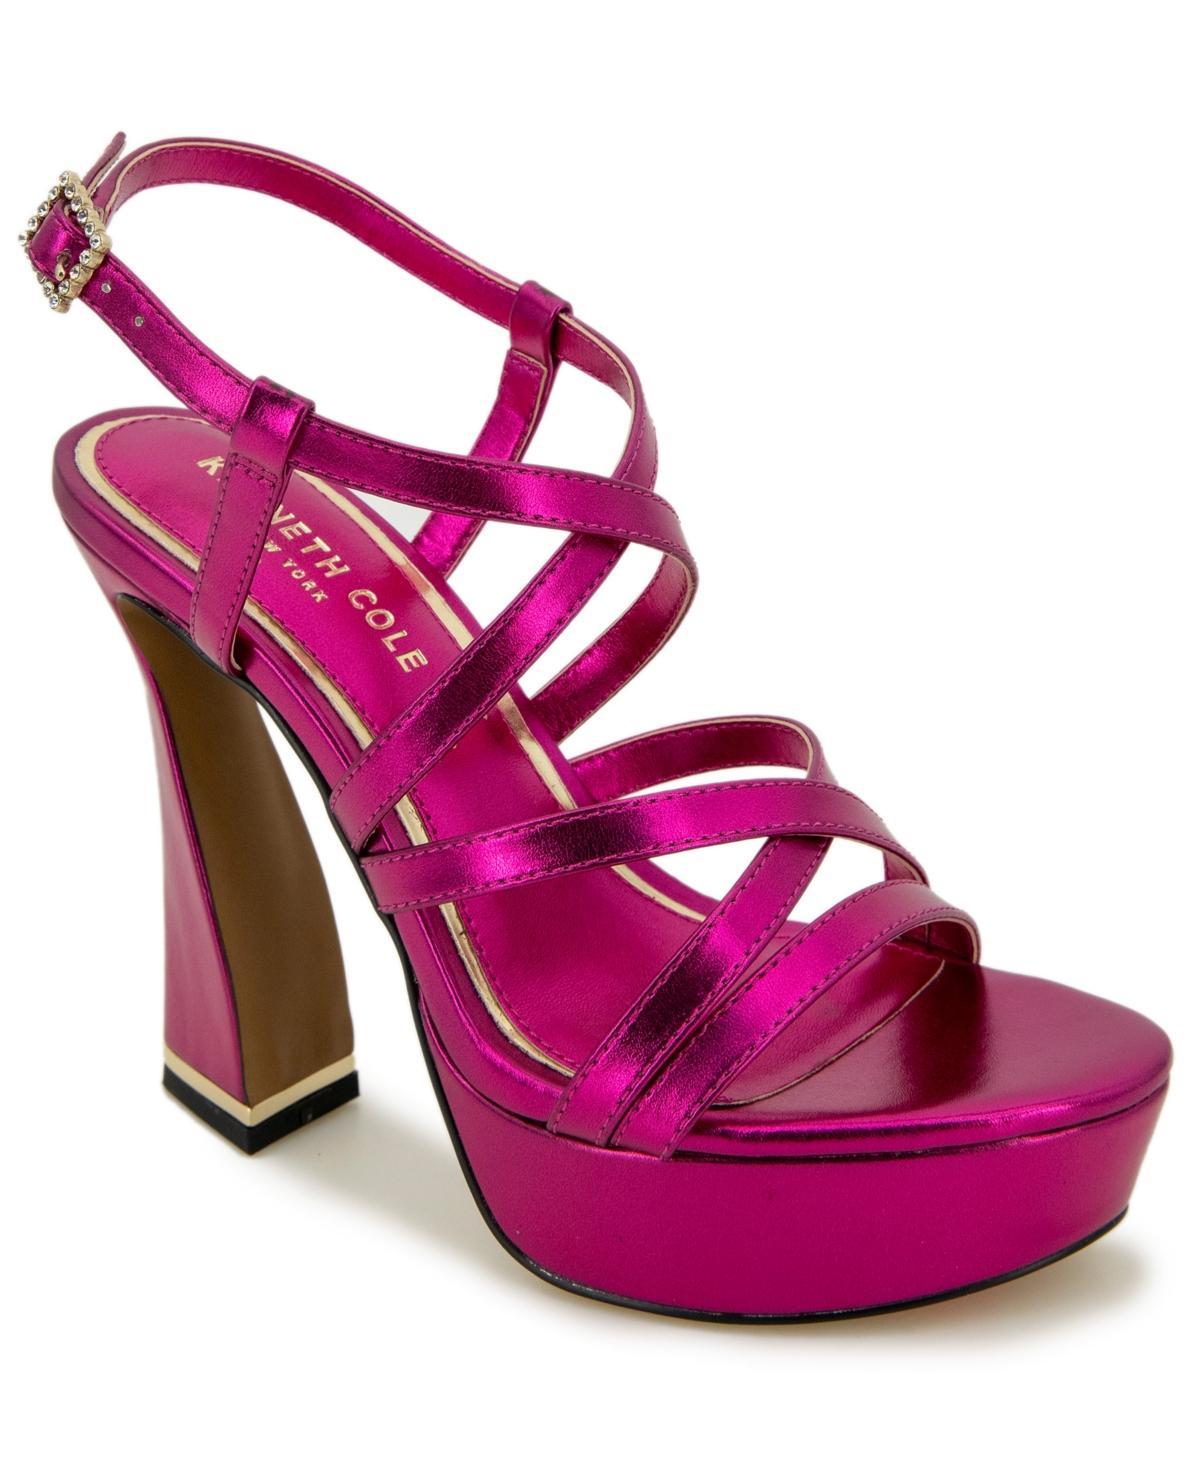 Kenneth Cole New York Womens Allen Strappy Platform Sandals Womens Shoes Product Image